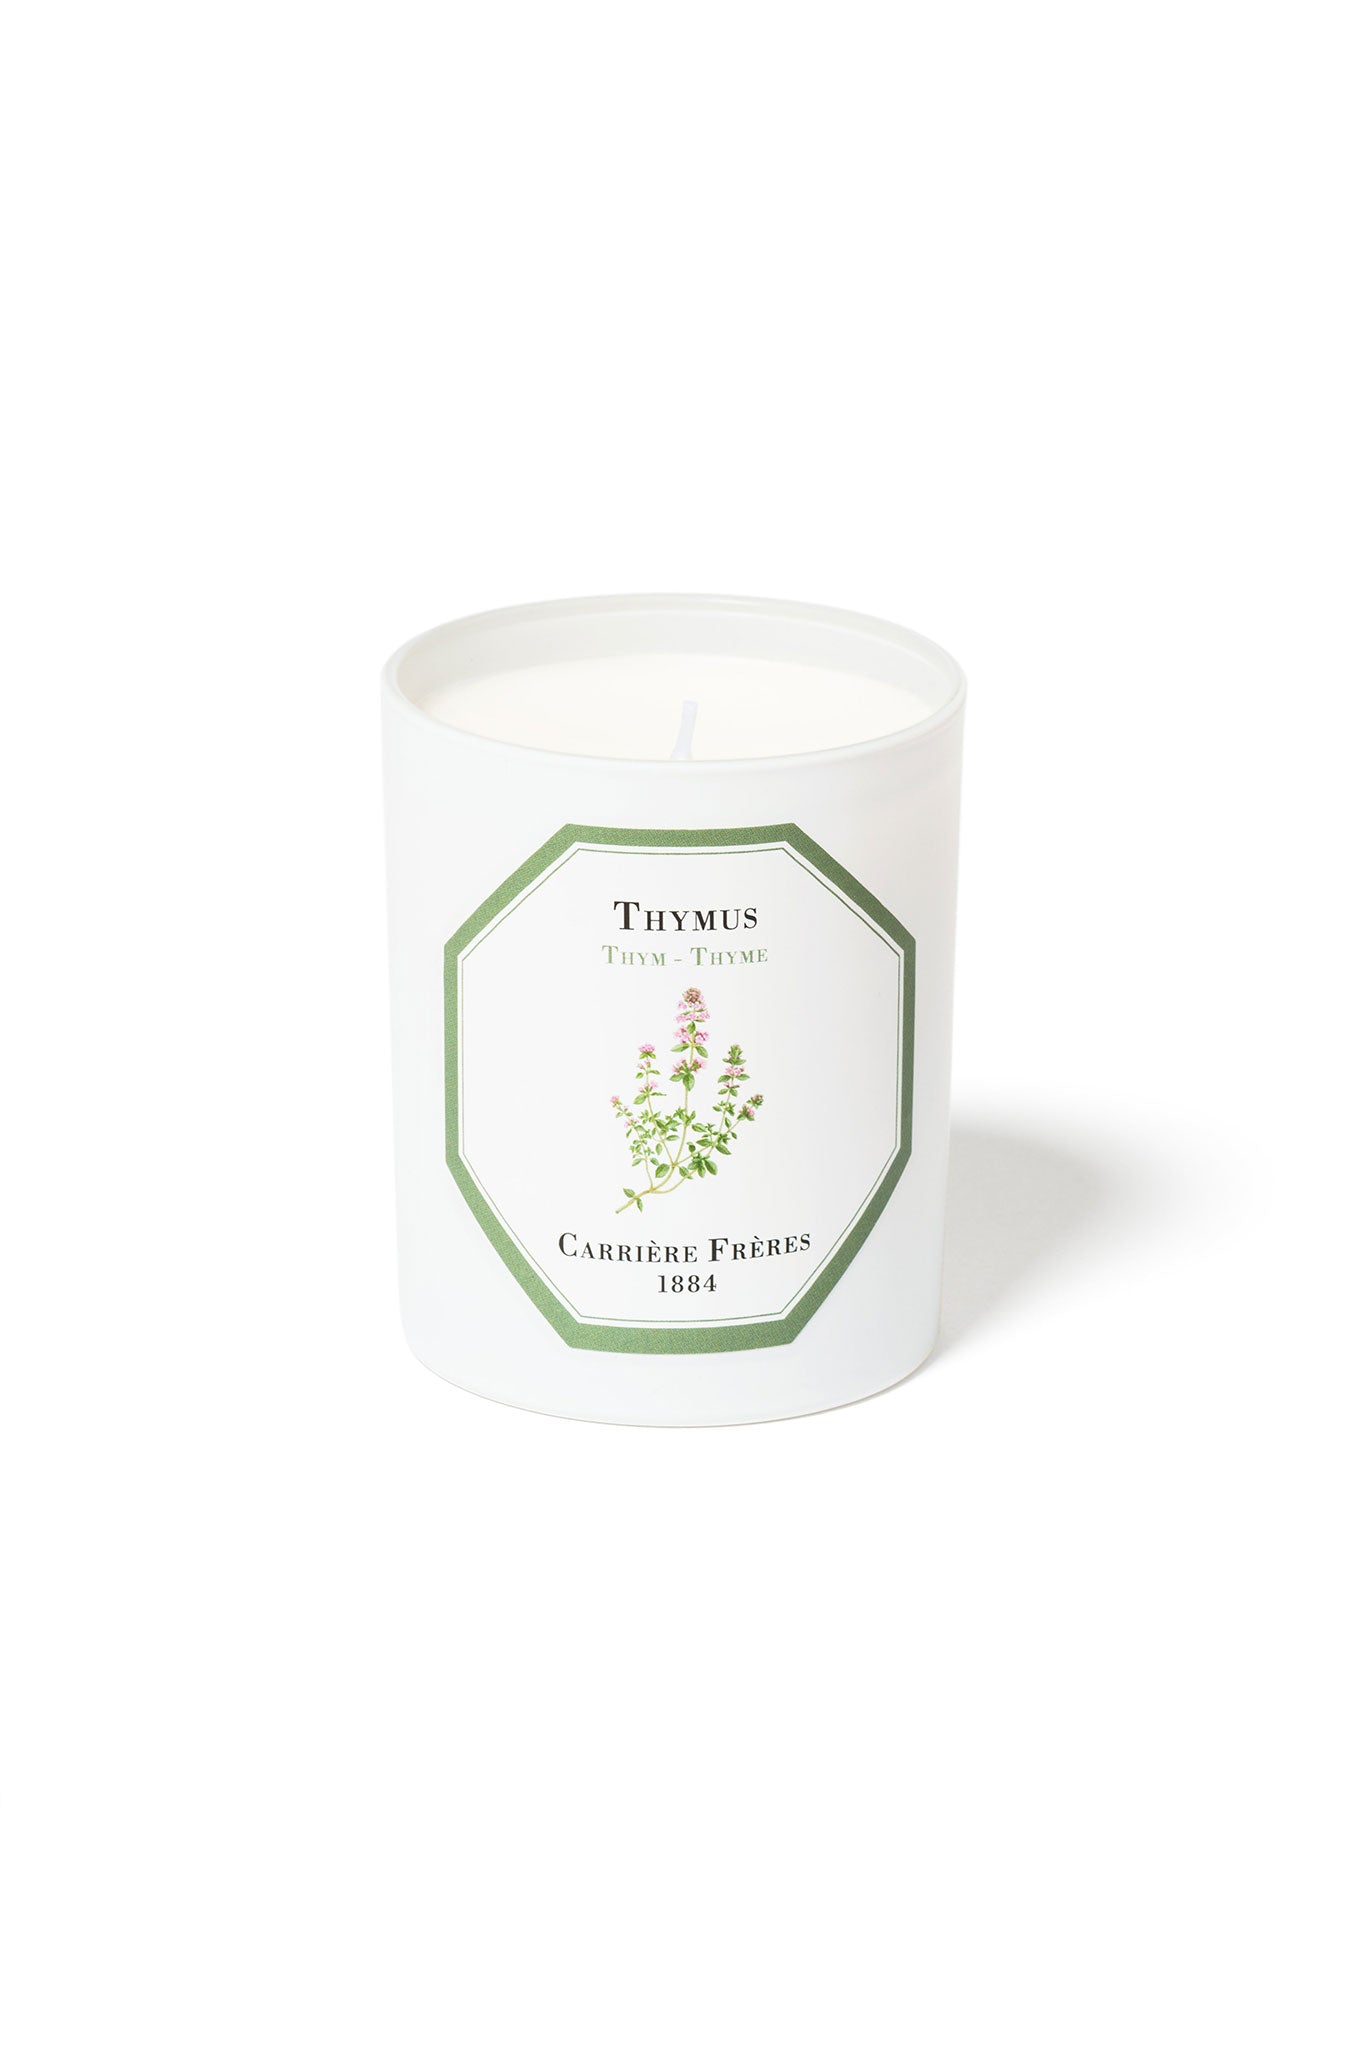 Thymus Thyme Candle